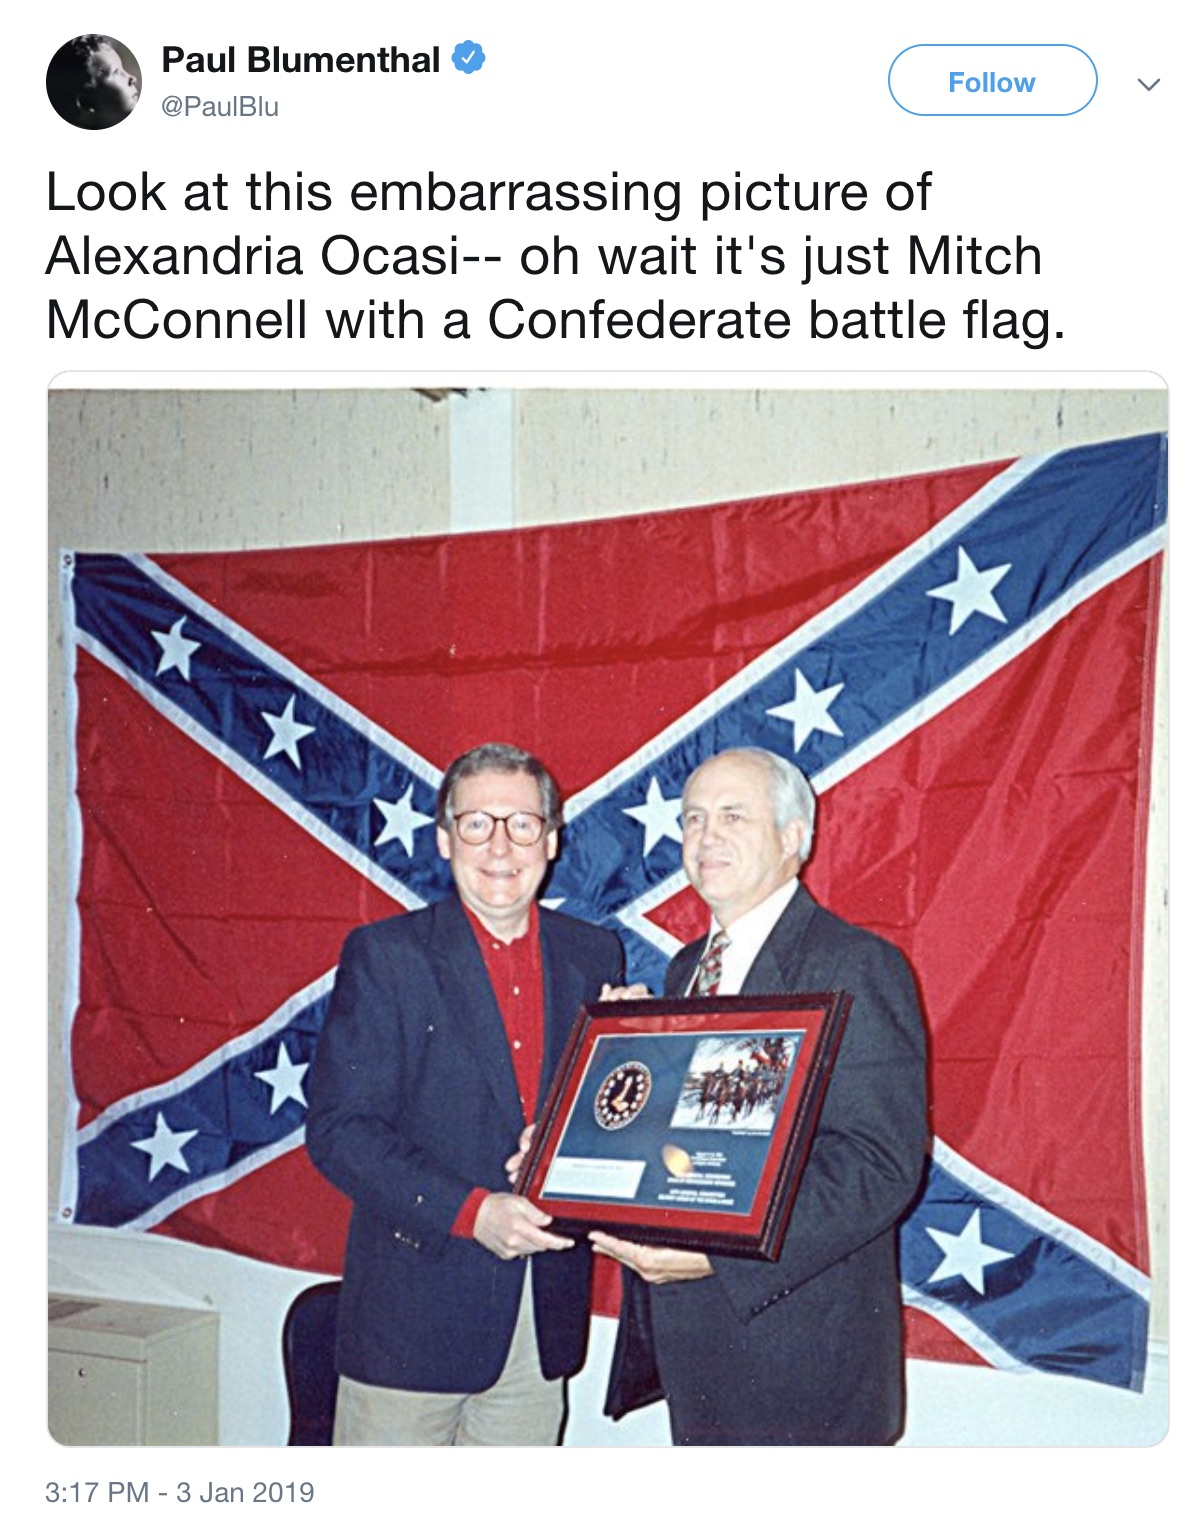 Paul_Blumenthal_on_Twitter___Look_at_this_embarrassing_picture_of_Alexandria_Ocasi-_oh_wait_it_s_just_Mitch_McConnell_with_a_Confederate_battle_flag_